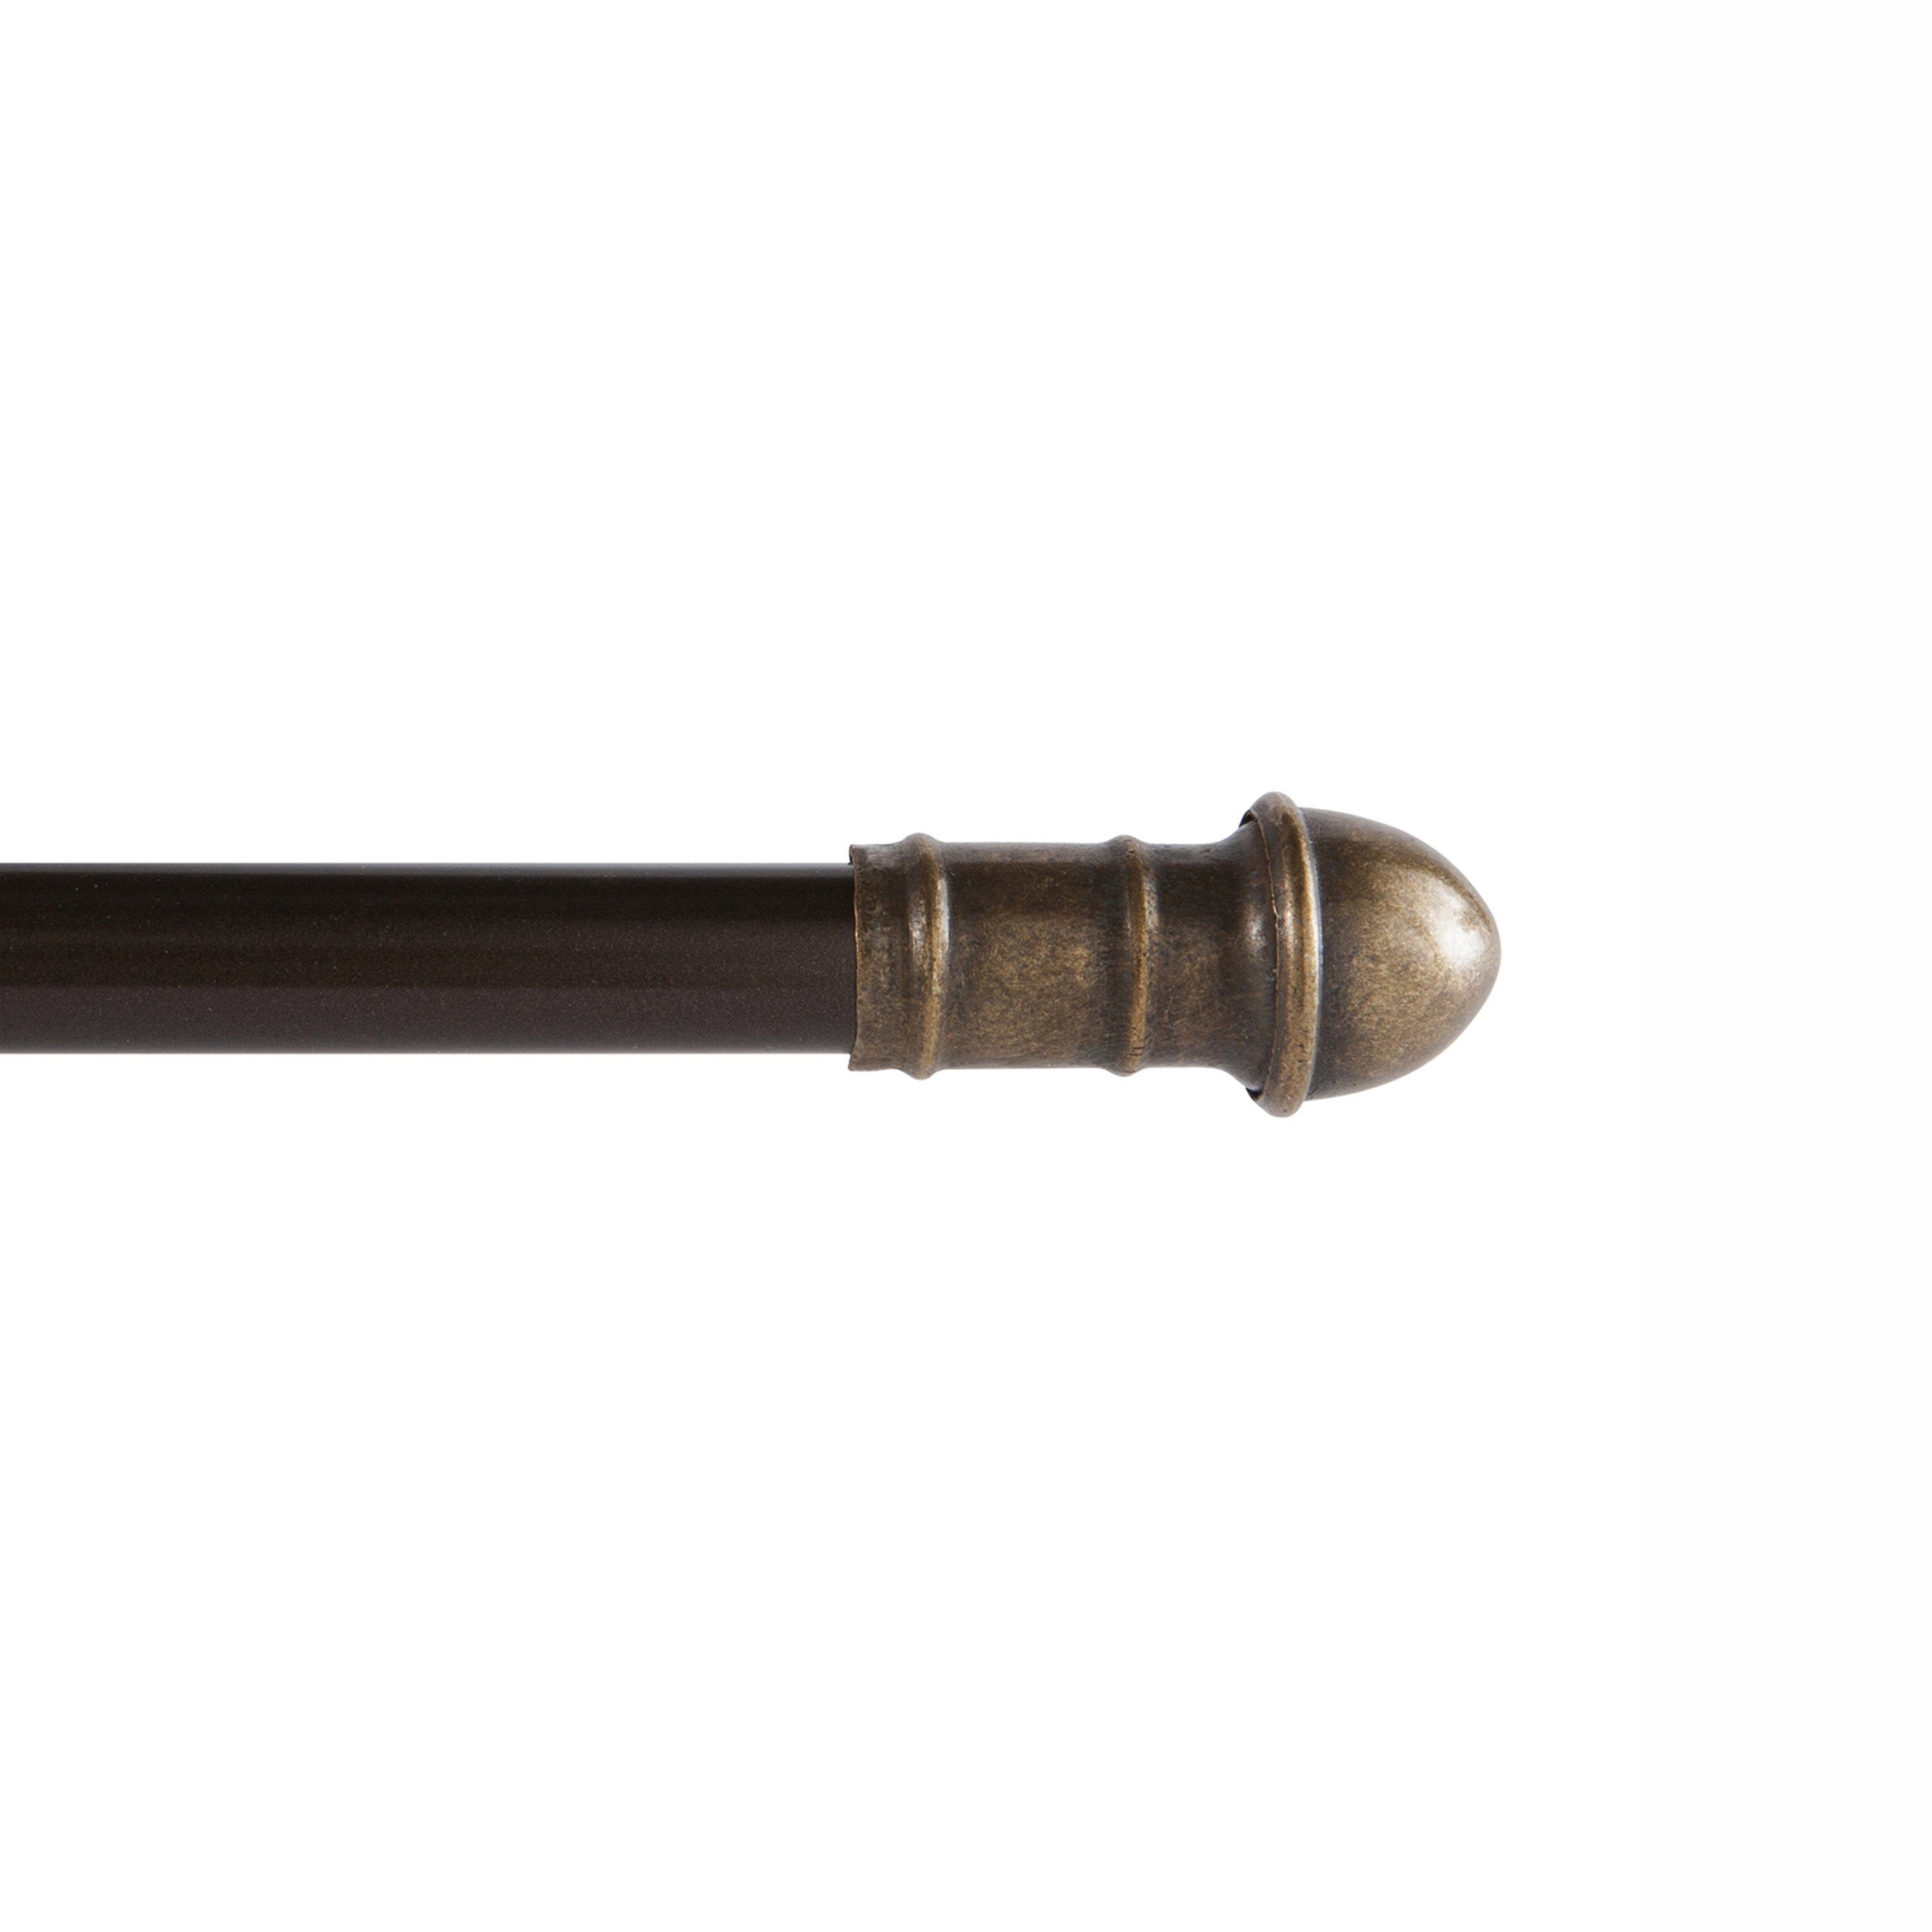 Mainstays Caf Curtain Rod, 28" - 48" Length, Oil Rubbed Bronze - image 1 of 7